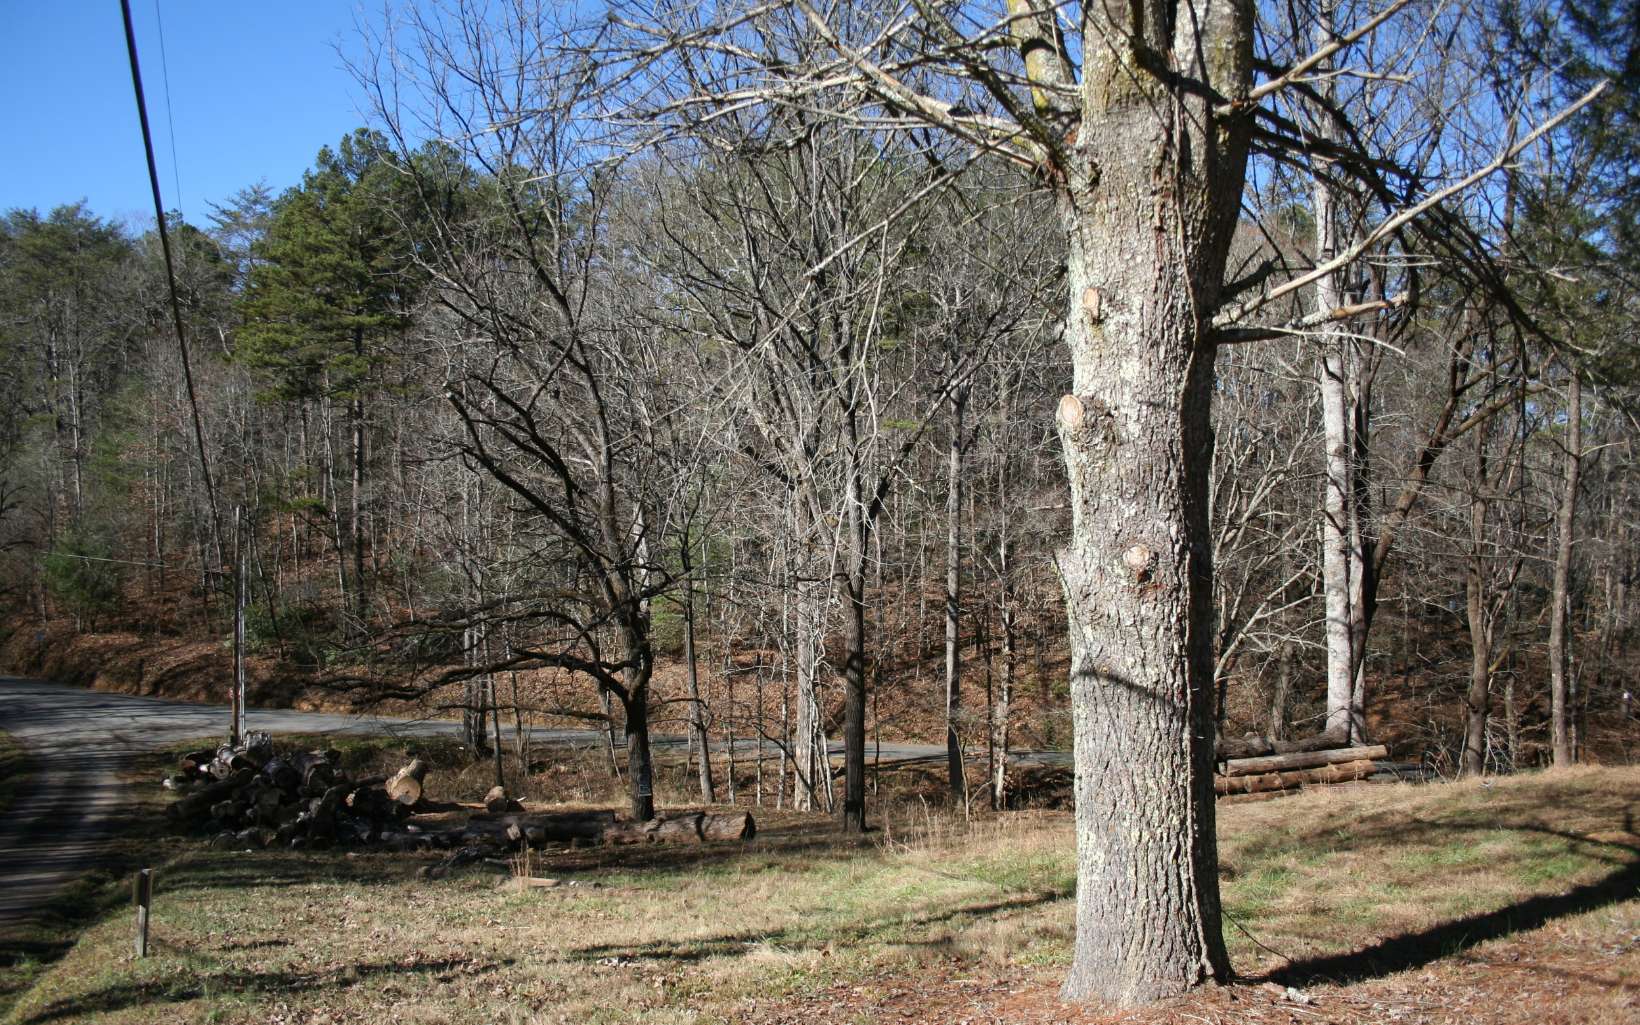 INVESTORS TAKE A LOOK! Gorgeous rushing creek front property. Could be subdivided for two stunning YEAR ROUND MOUNTAIN VIEW LOTS. There is a septic/ well on the property and all utilities in place. Bring your builder and your plans. Under 10 minutes to Downtown Blue Ridge. County water across the road and fire hydrant.